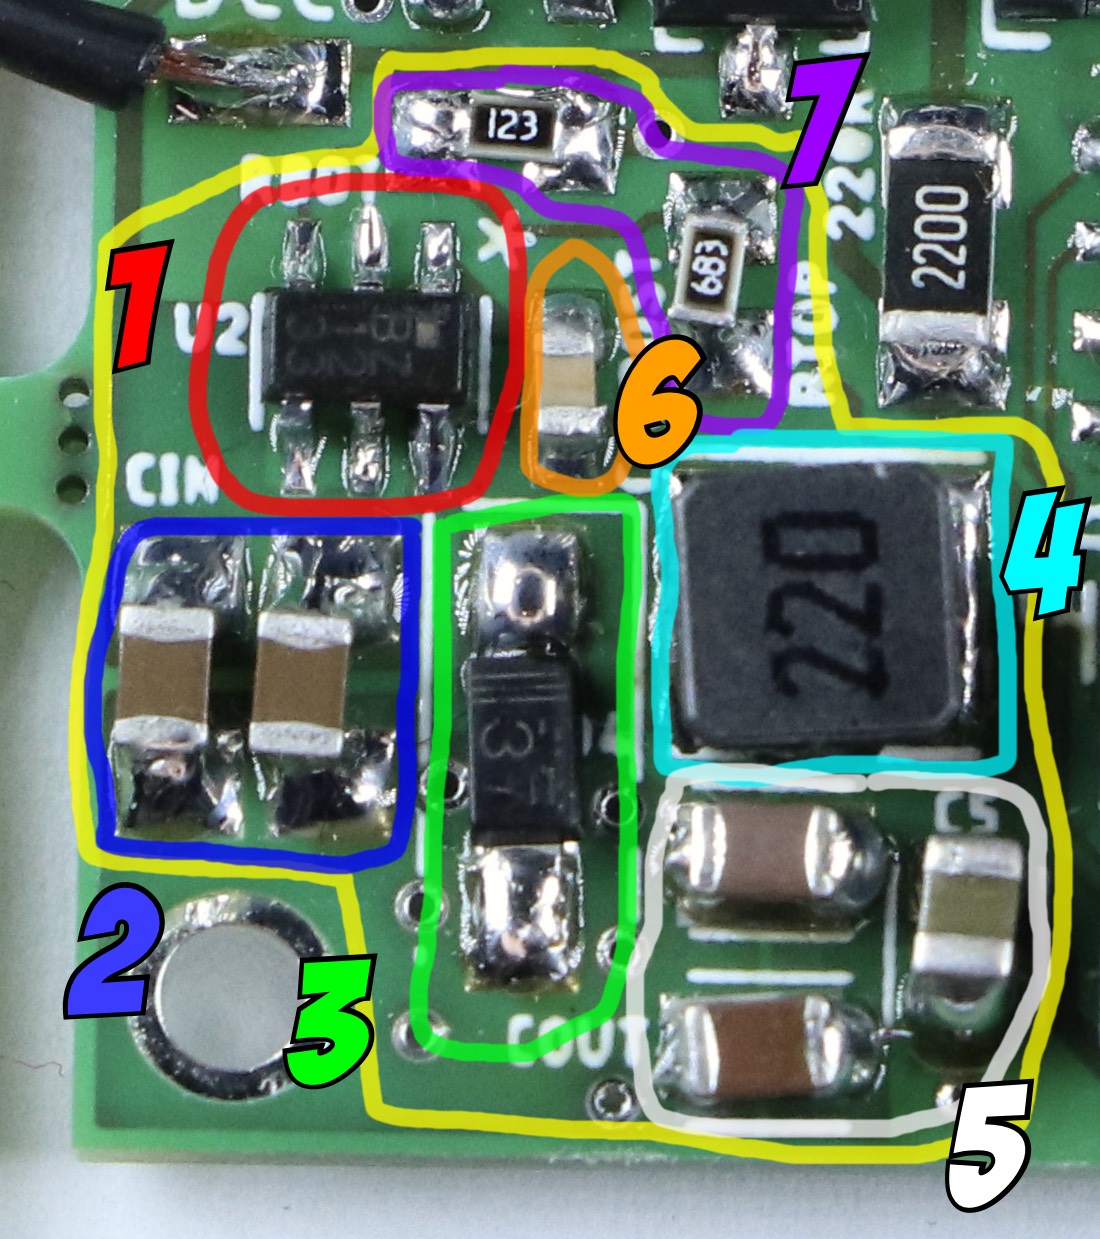 A larger extract from the last photo. It shows the same chip with six pins, but now more surroundings. Different components are highlighted and labelled numbers 1 through 7.